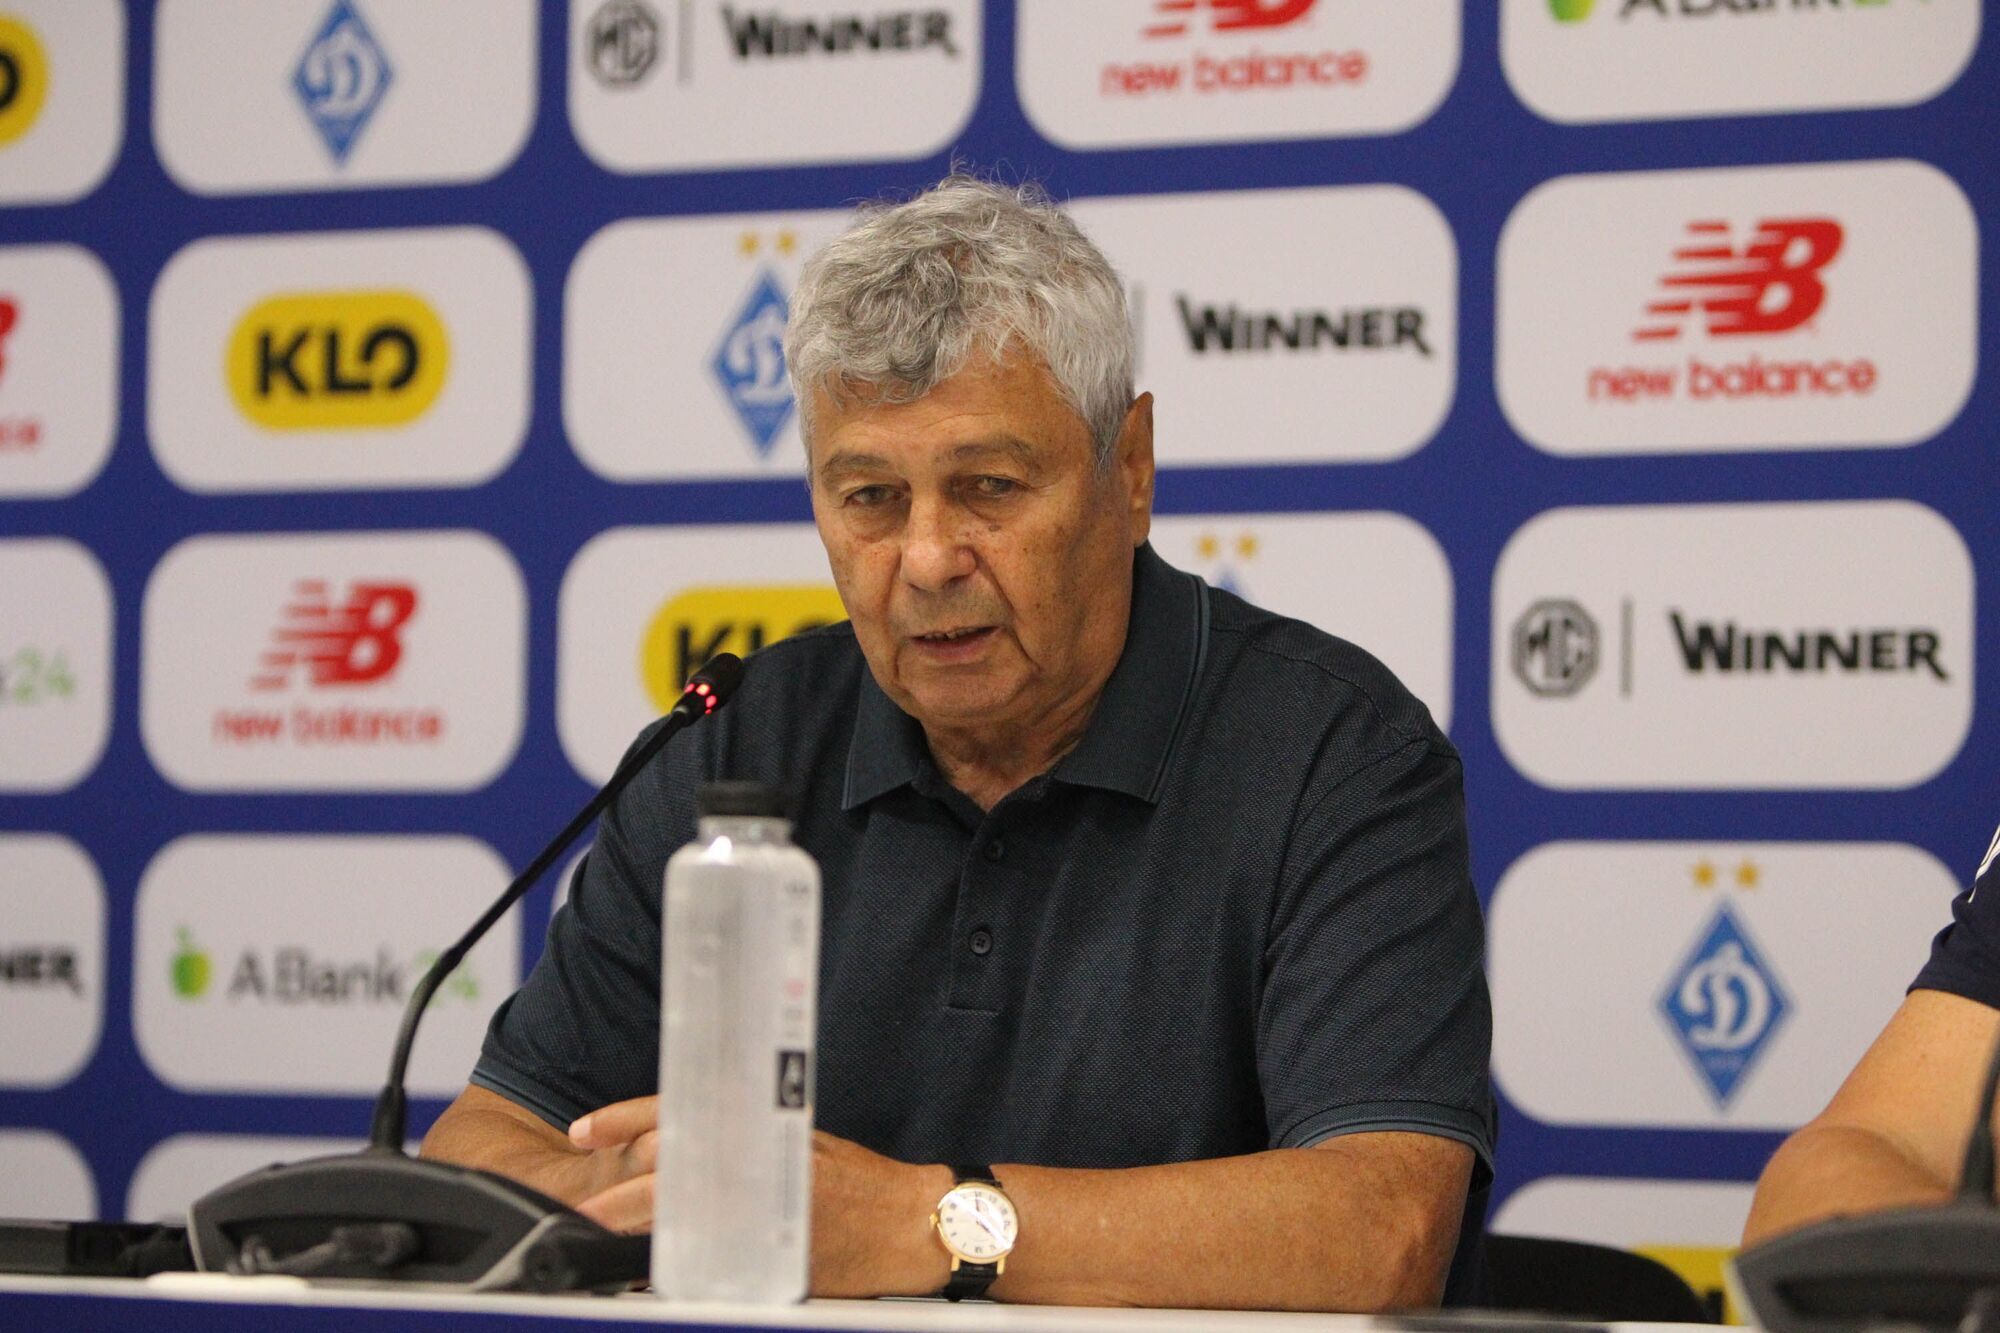 ''We played against the African national team'': Lucescu made a controversial statement after Dynamo's defeat to Besiktas